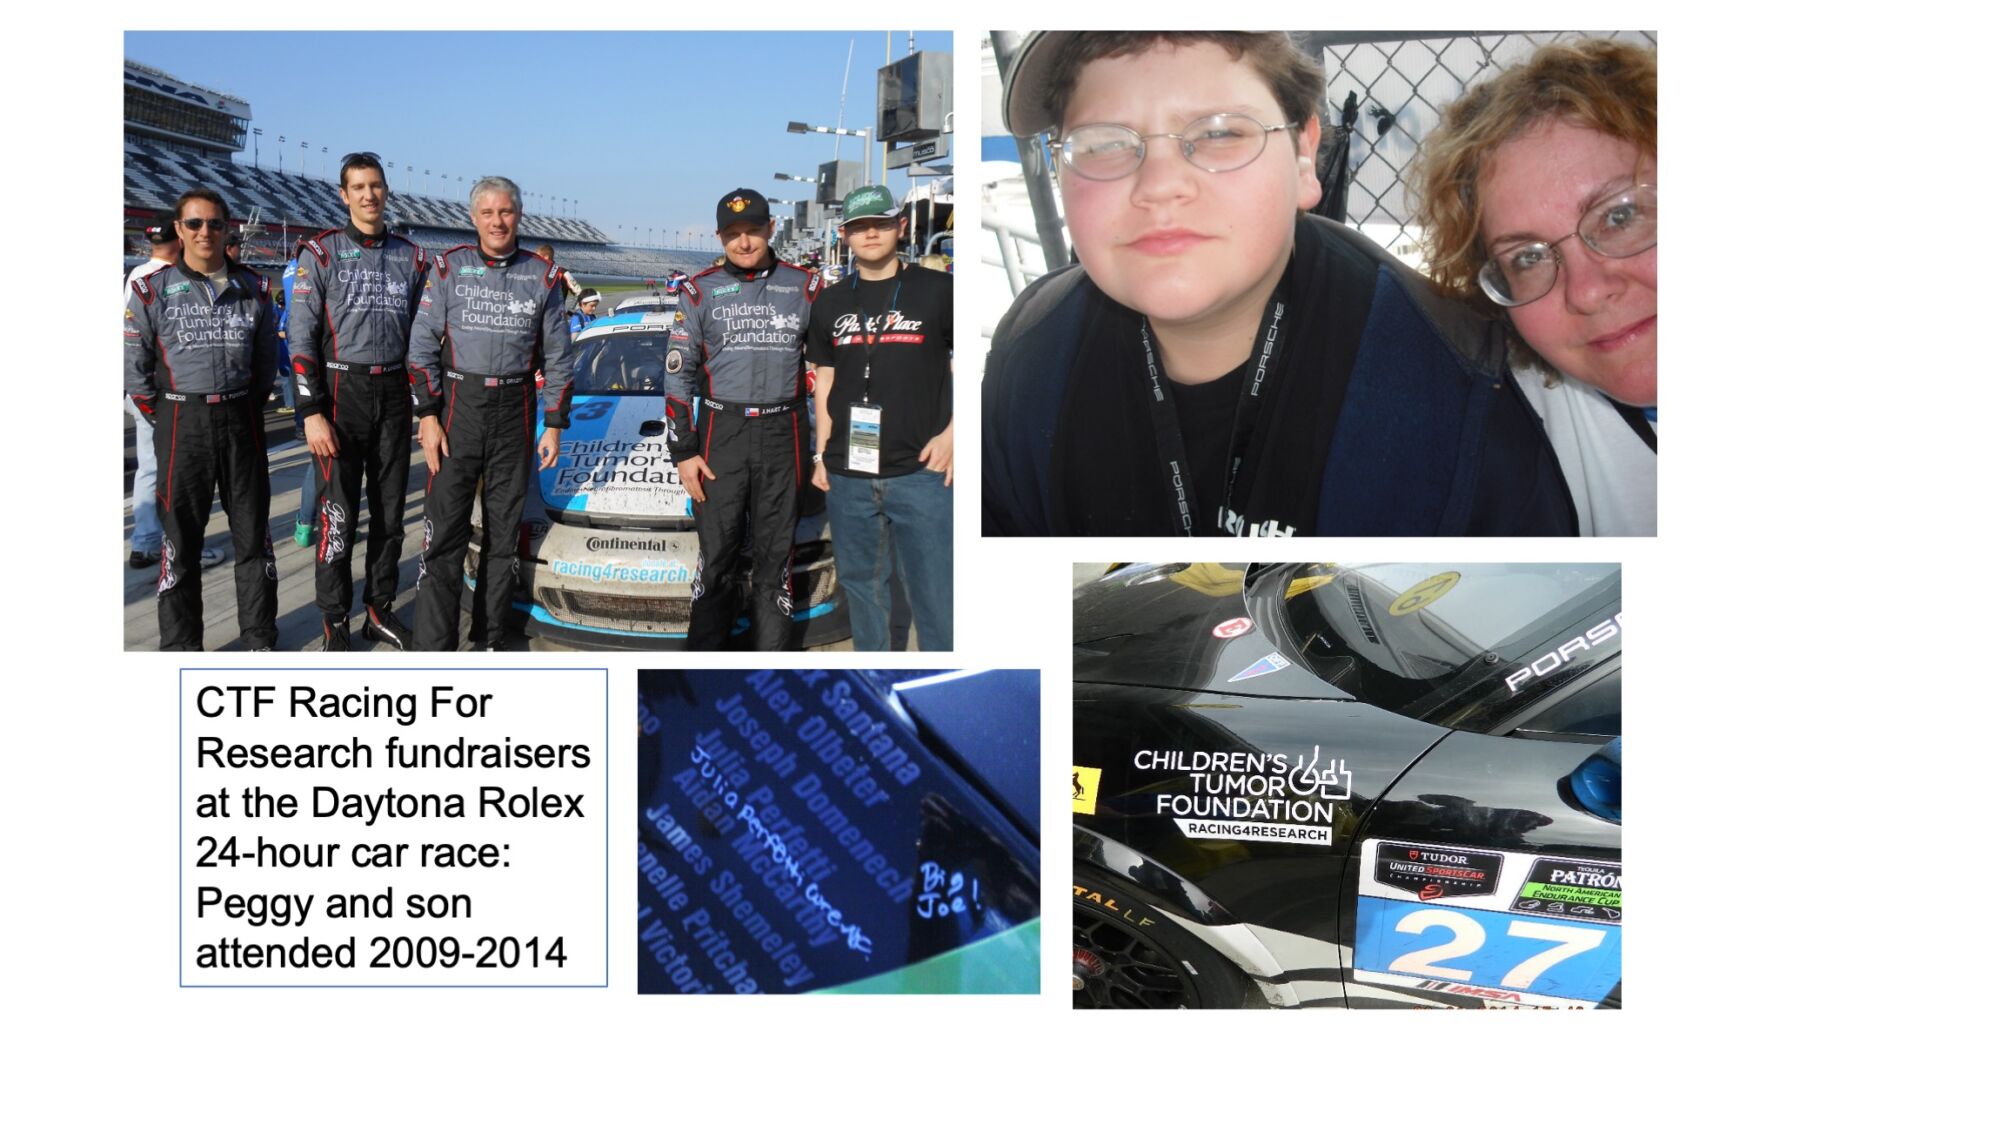 Group photo of race team next to a car, a photo of a child and a woman, a close-up of text on a document, and a car labeled "Children’s Tumor Foundation." Text mentions fundraising at Daytona Rolex 24-hour race (2009-2014).